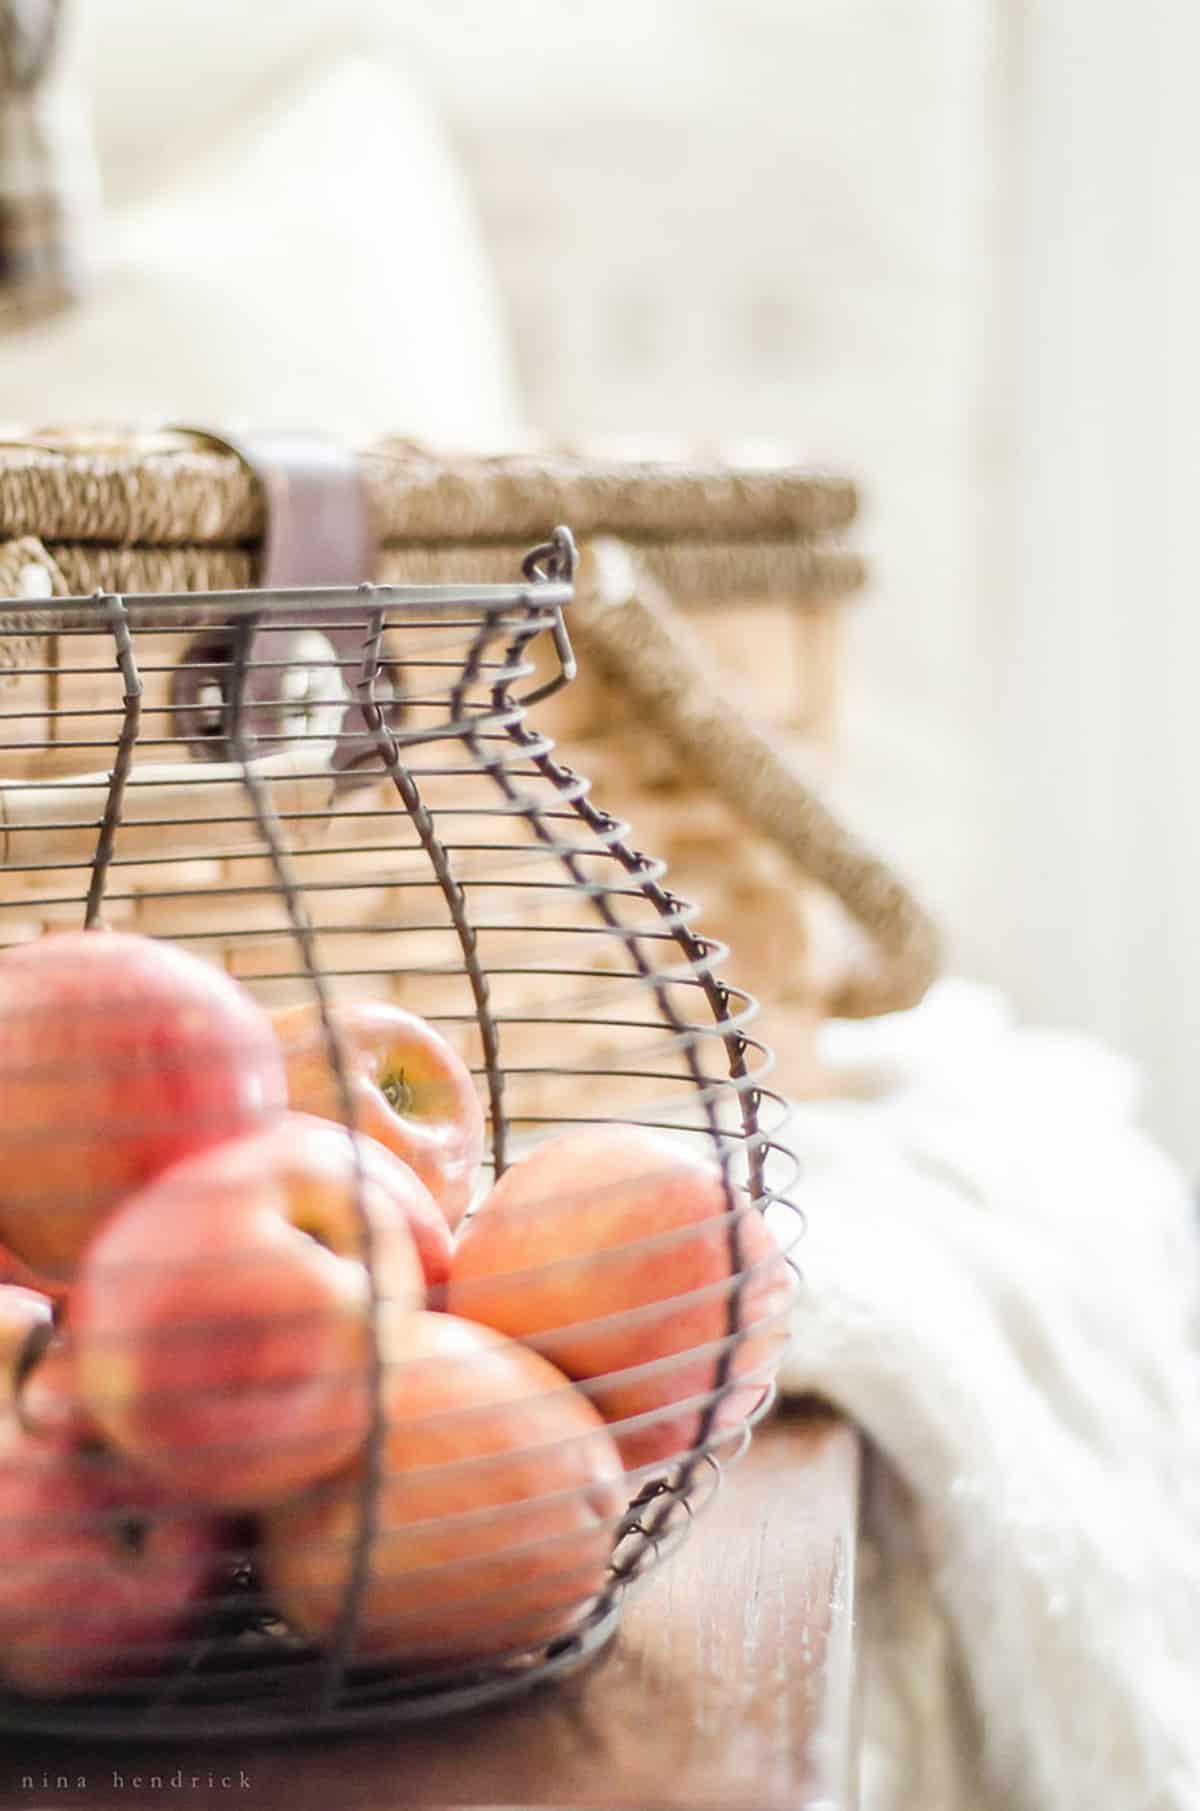 A basket of apples on the mudroom bench.